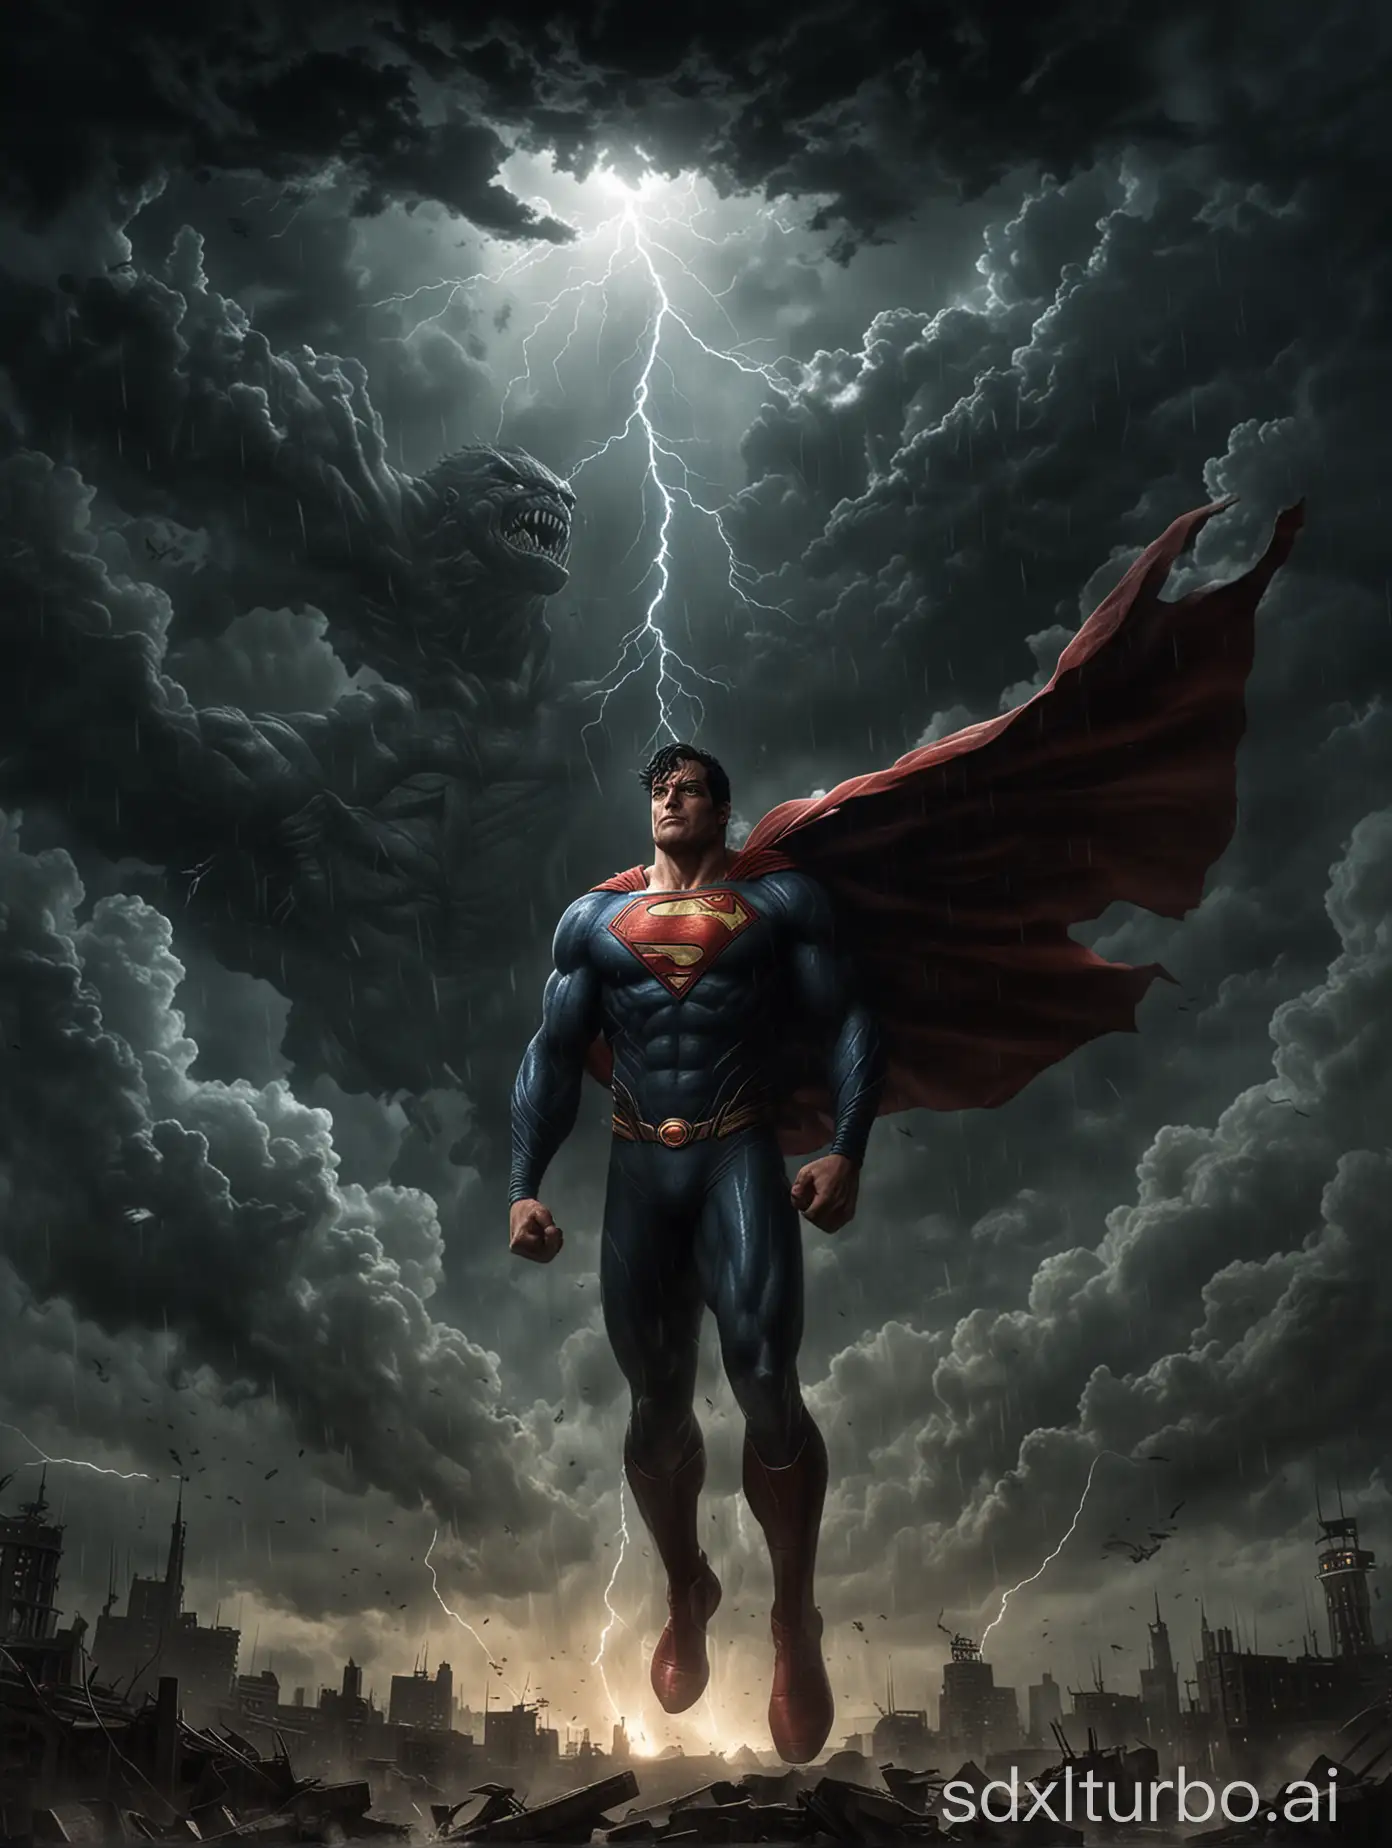 Dark sky, there are lightning and monsters appearing in the sky. Huge. Superman. Dark wind